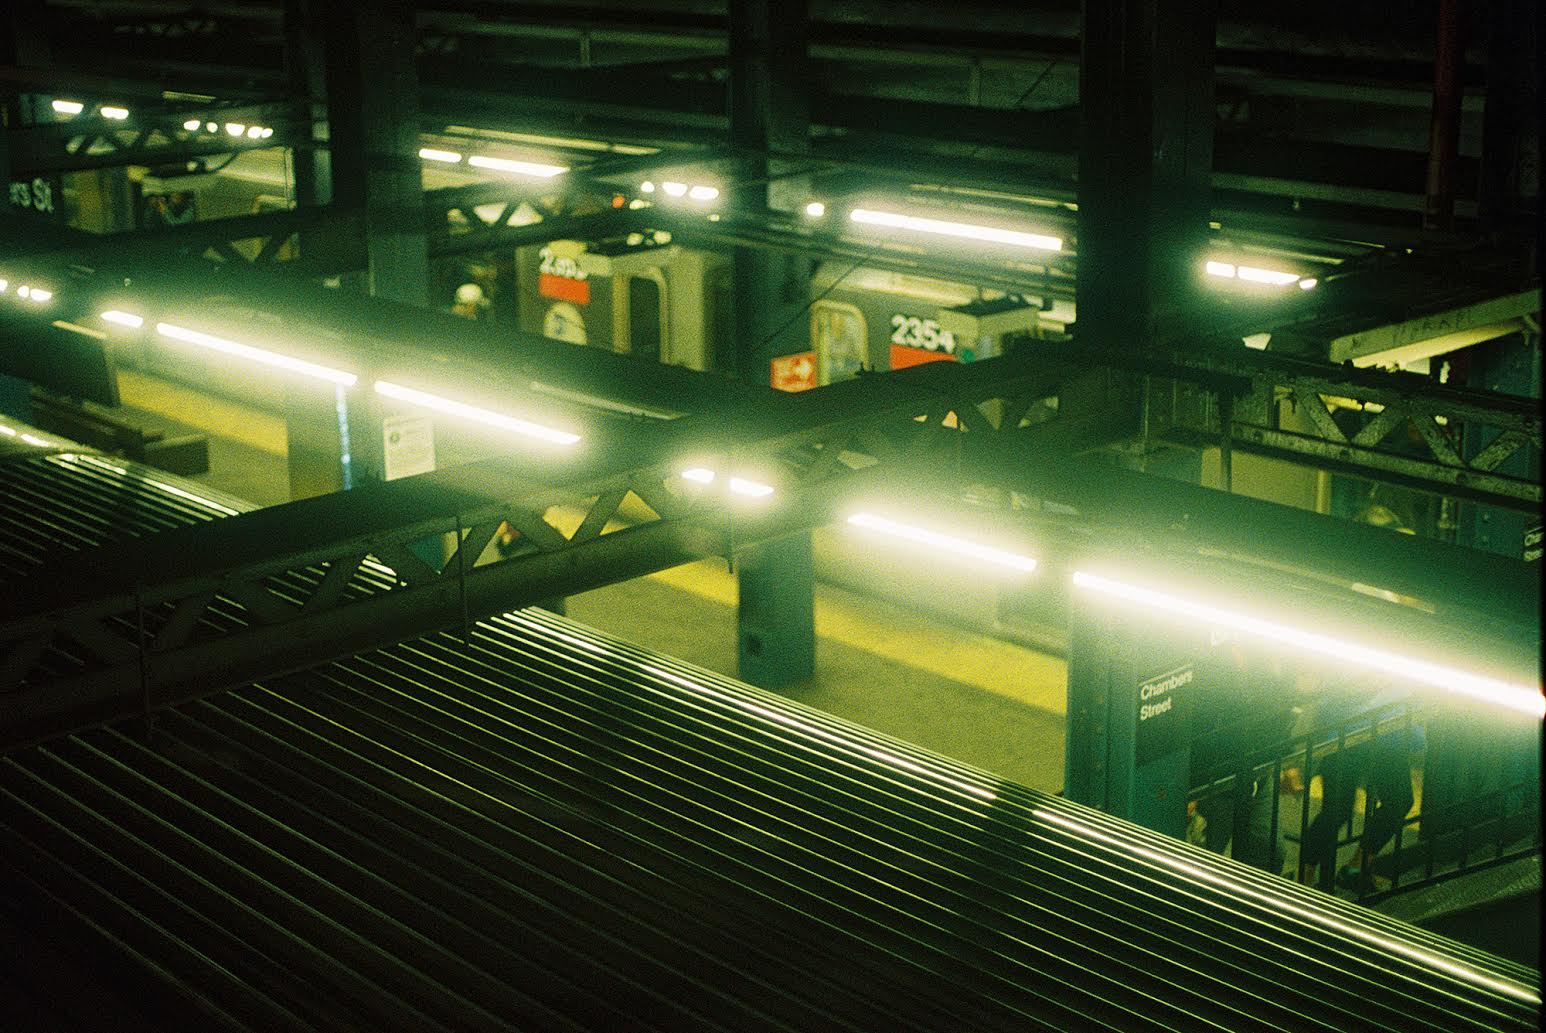 A color photograph of a subway station.